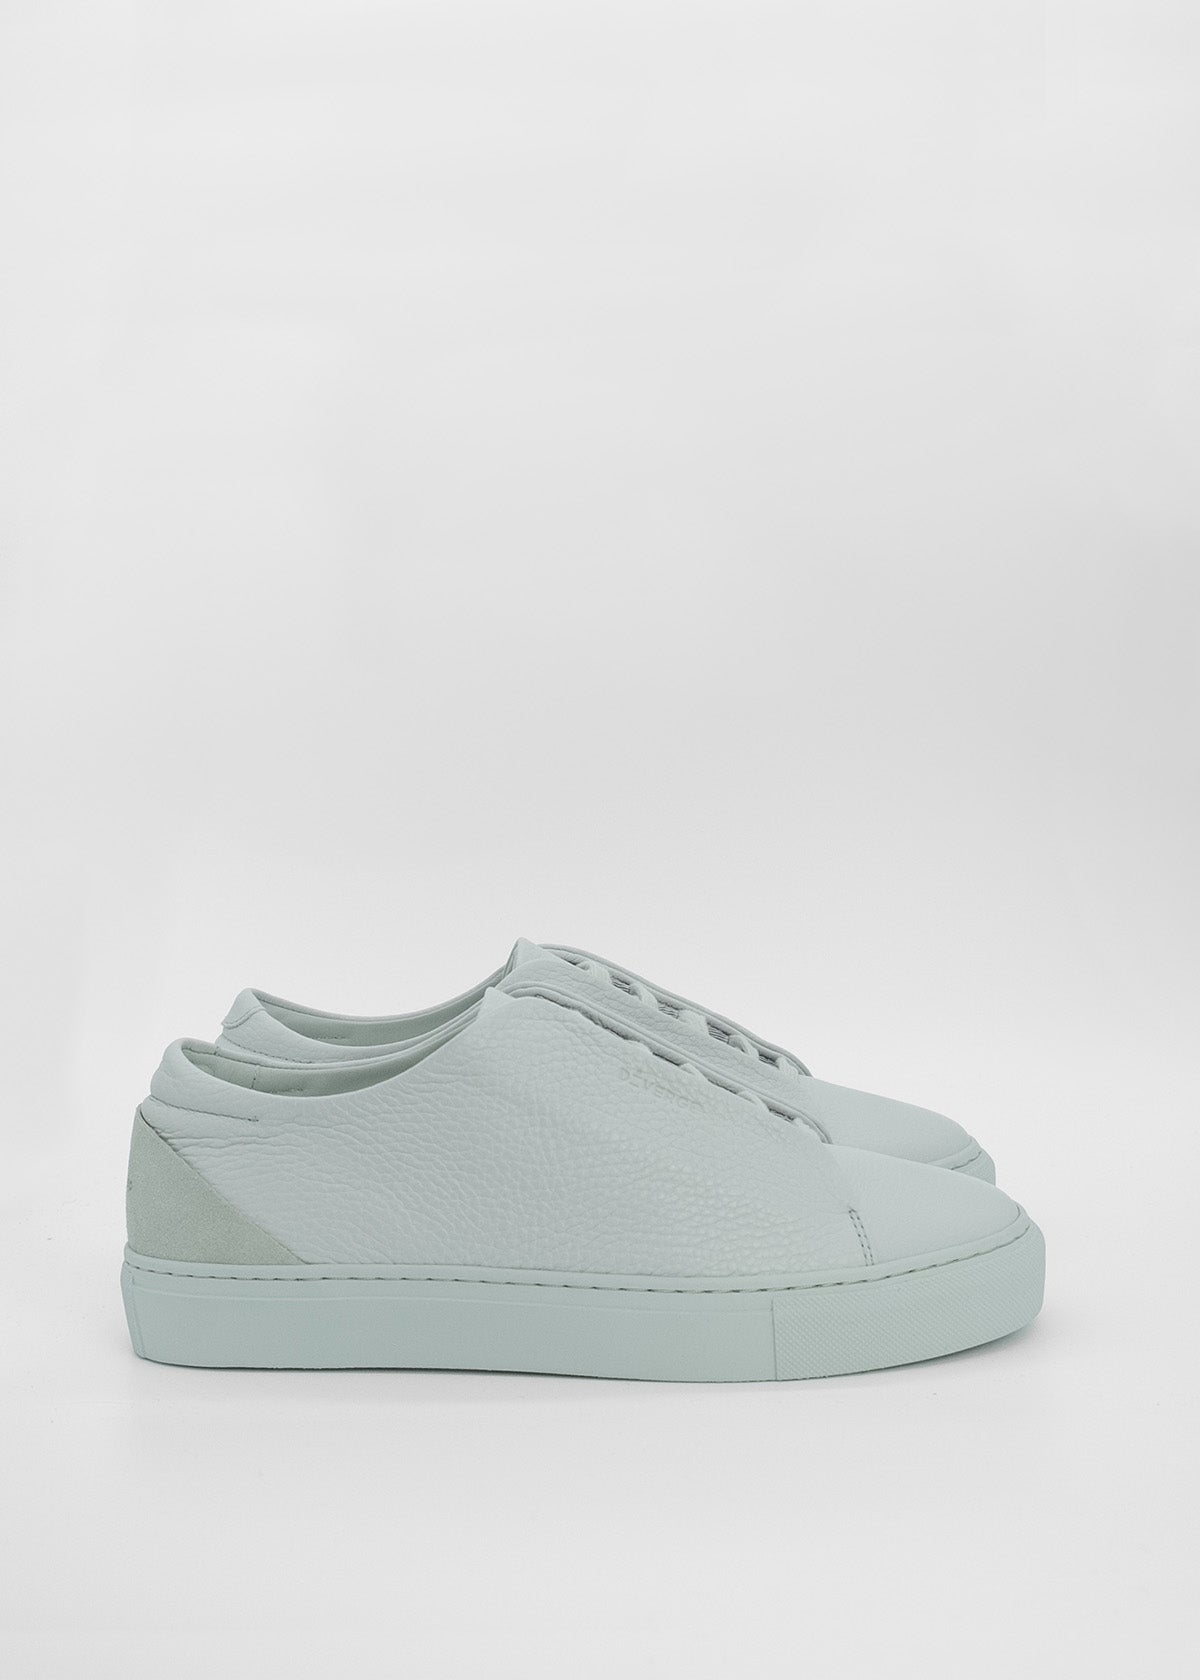 A pair of ML0033 Grey Floater, handcrafted in Portugal, with white soles on a white background.